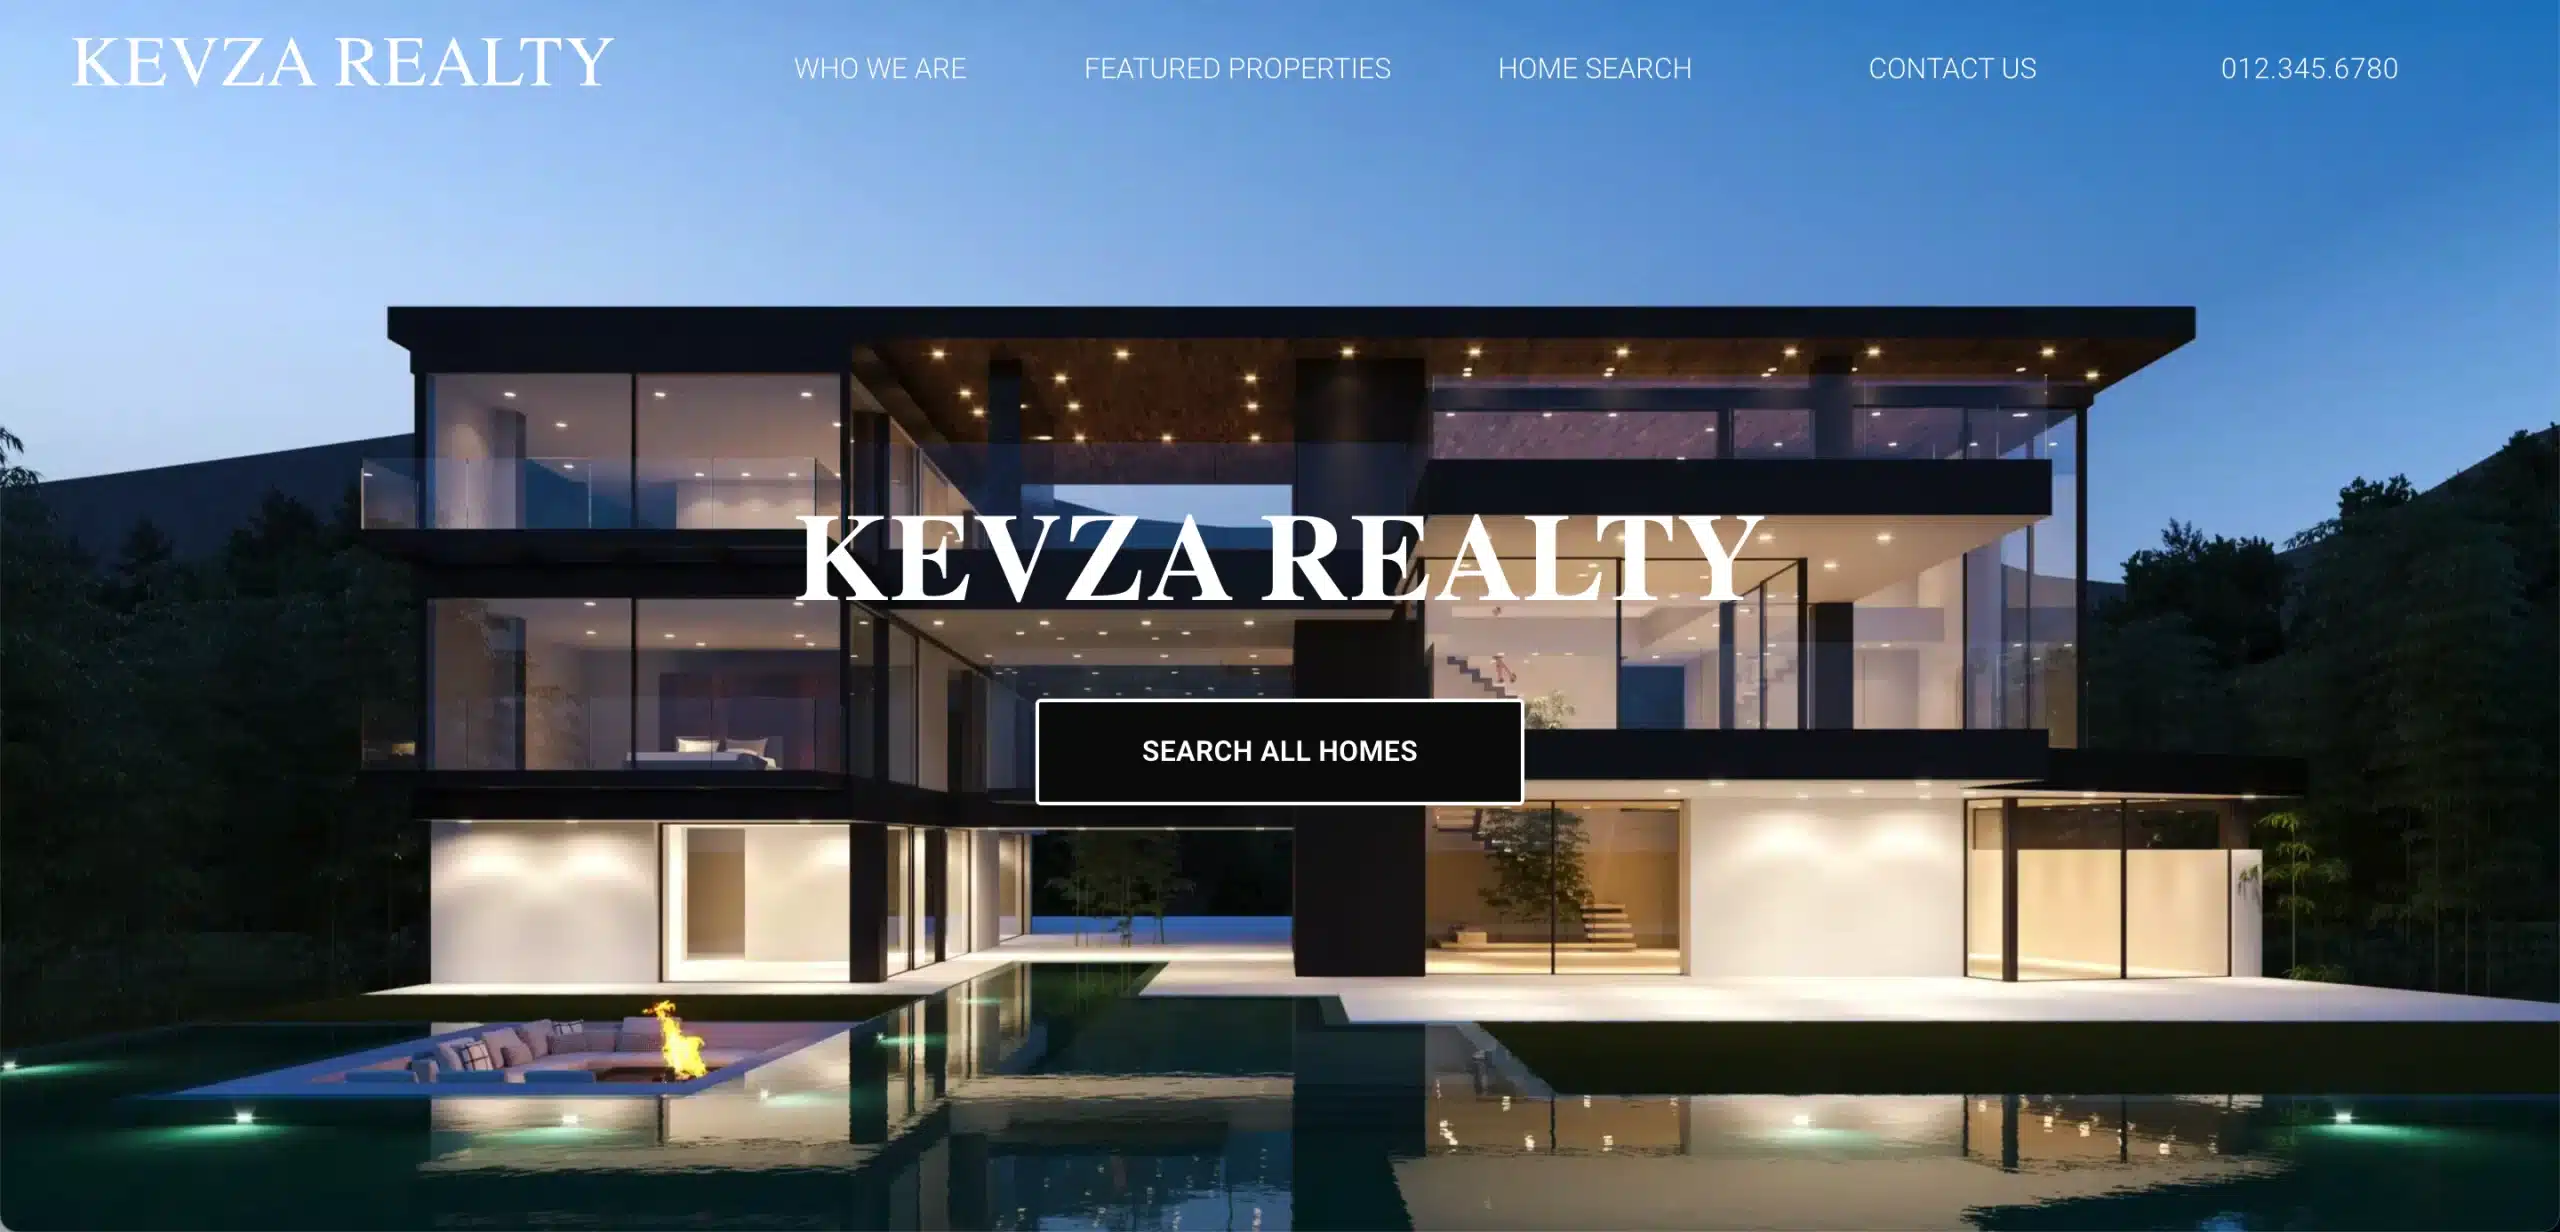 A Real Estate website created by Kevza Leads